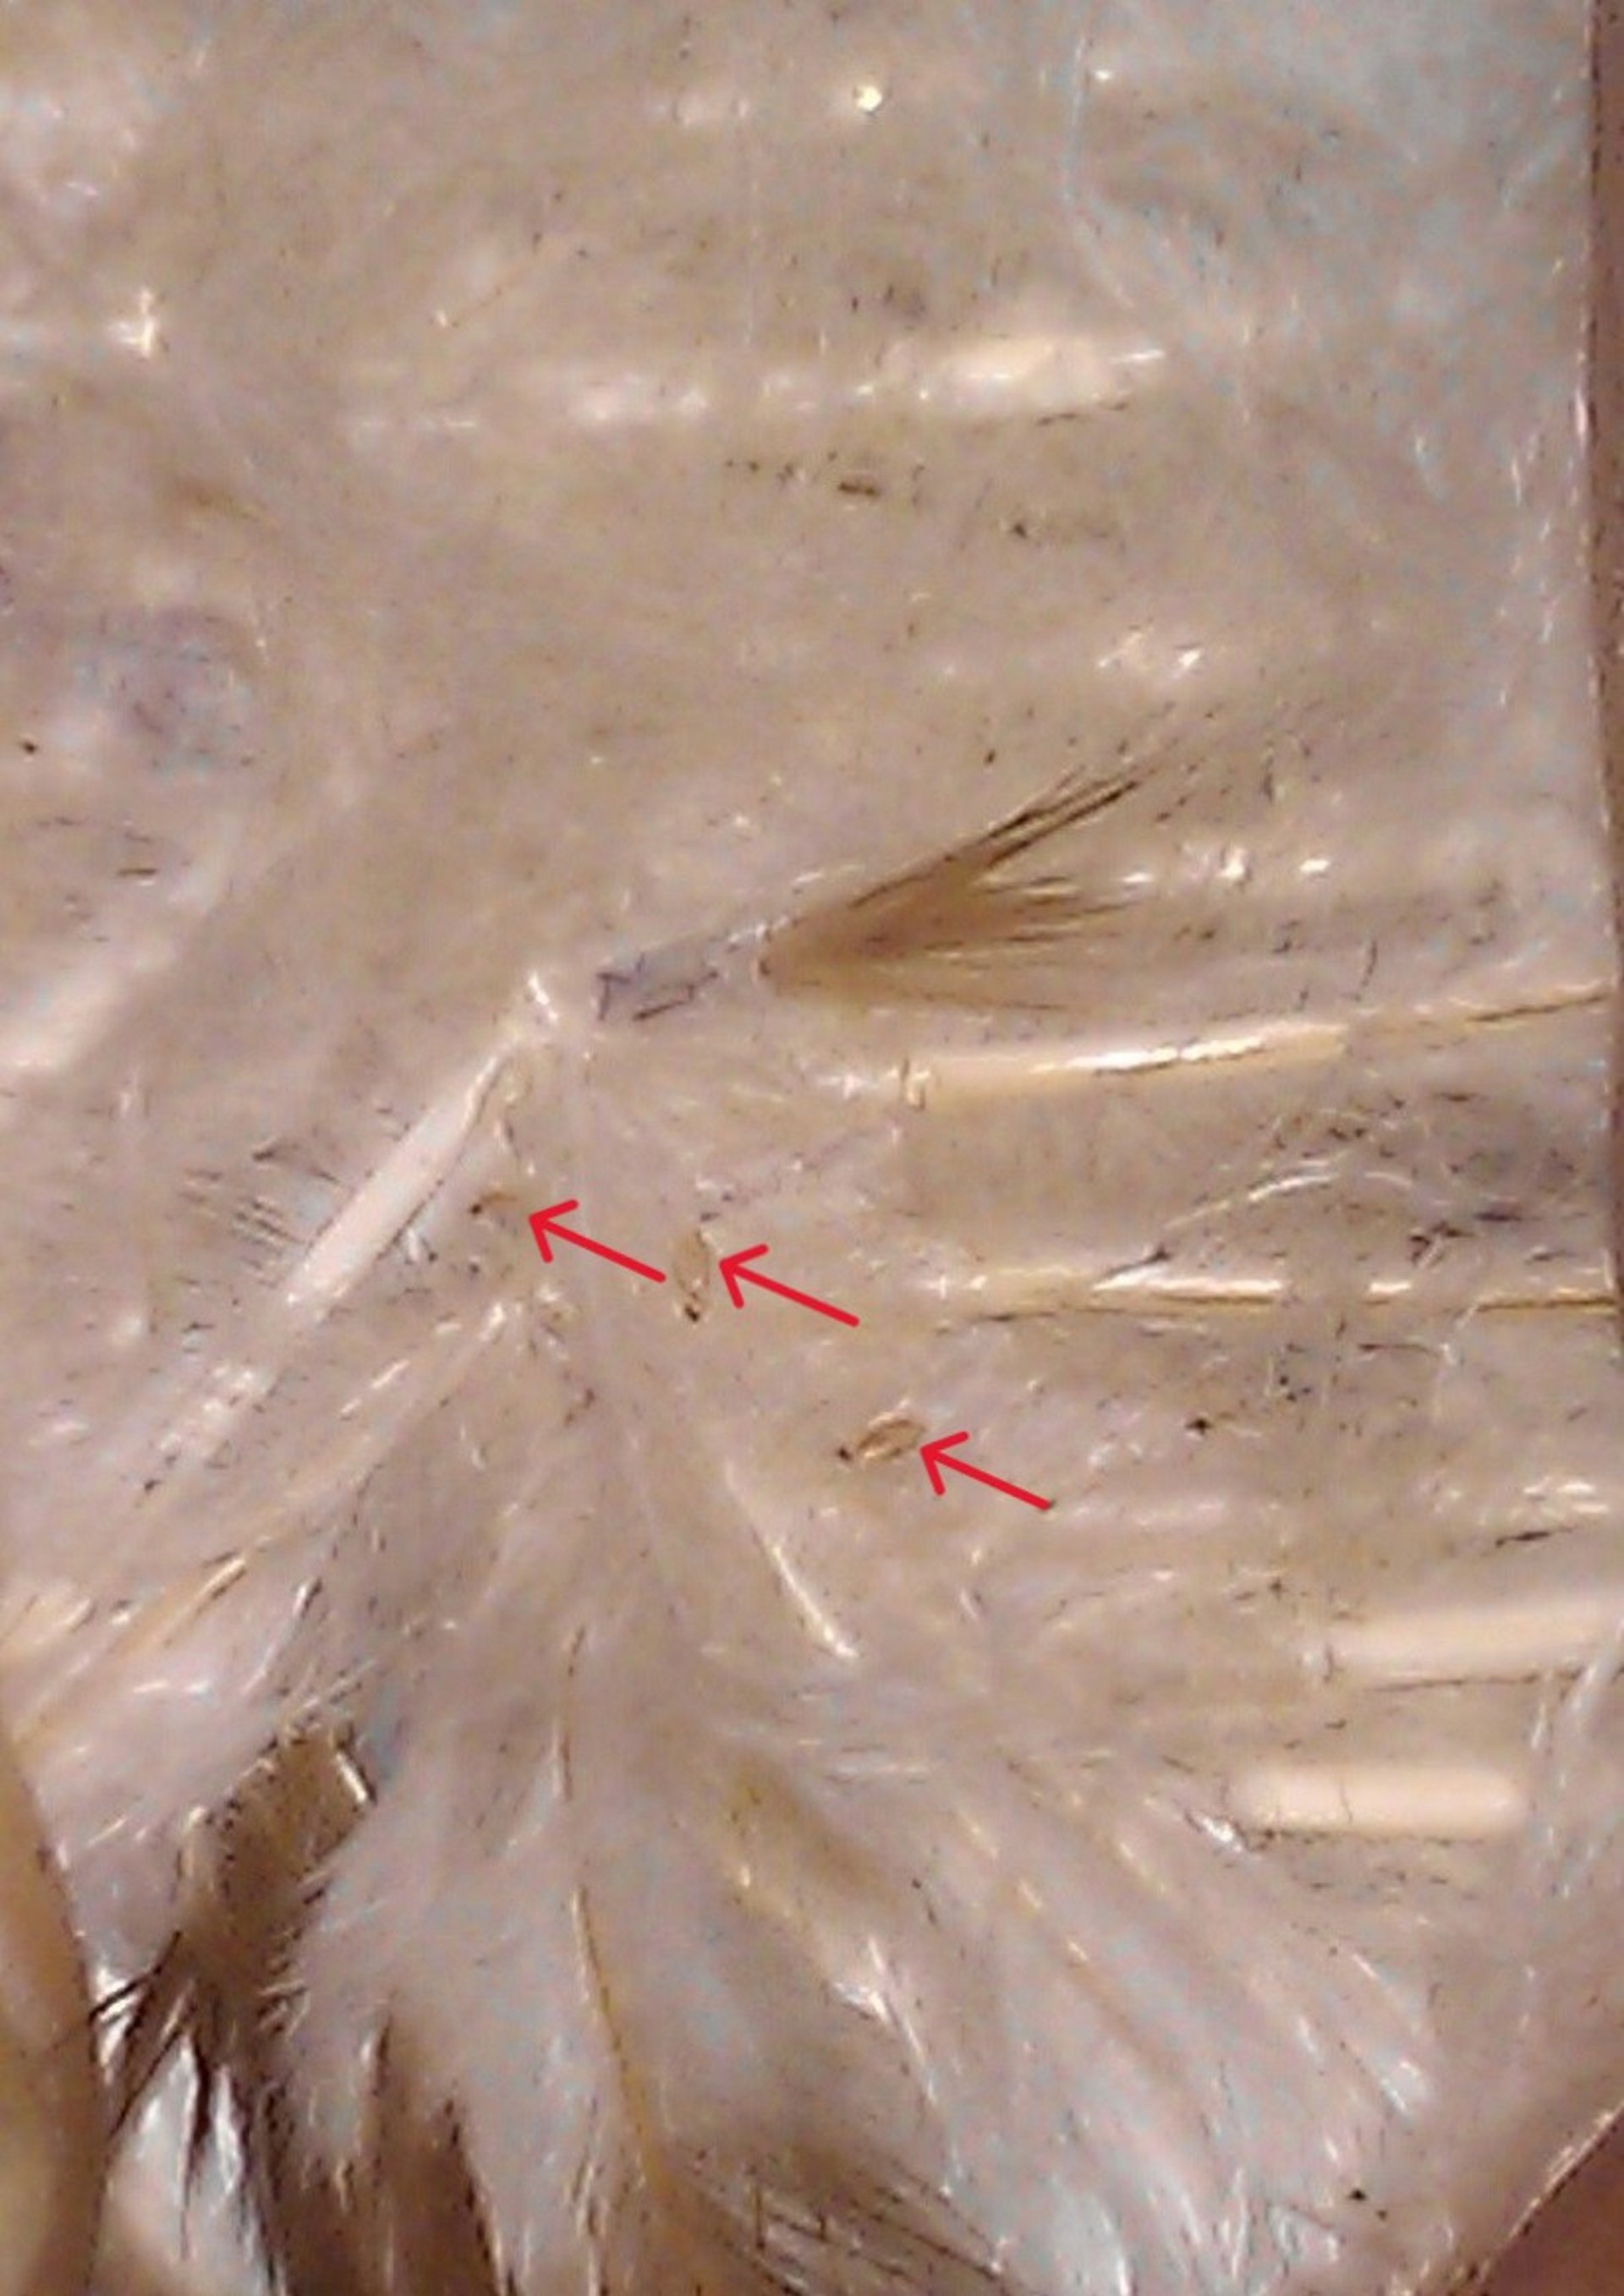 Parting feathers to see lice on a White Leghorn